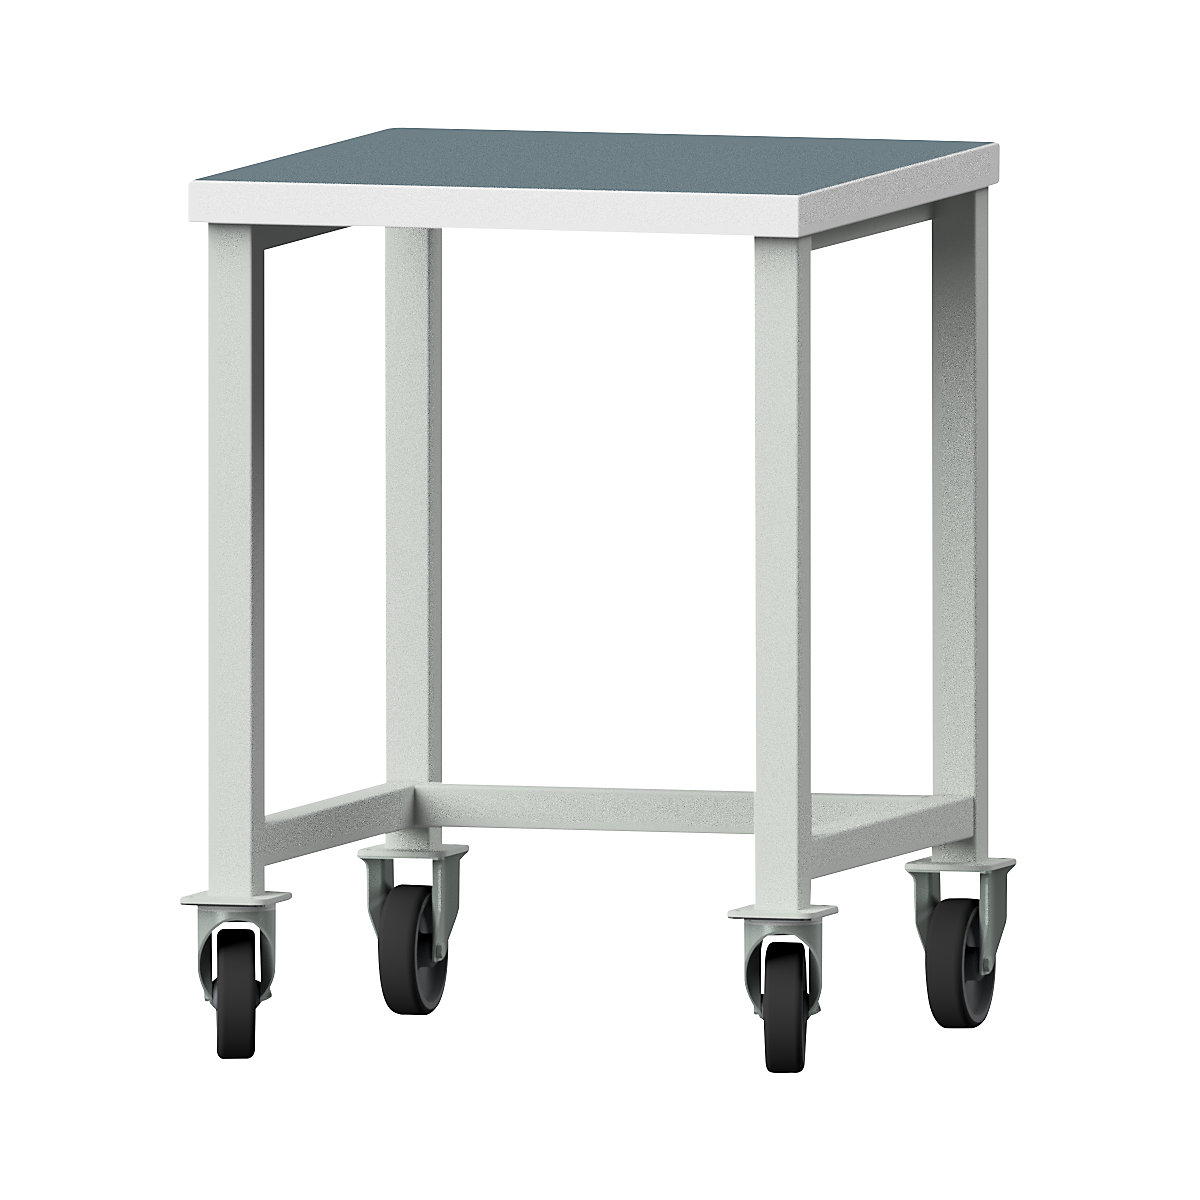 Compact workbench – ANKE, width 605 mm, without substructures, mobile, universal worktop-3